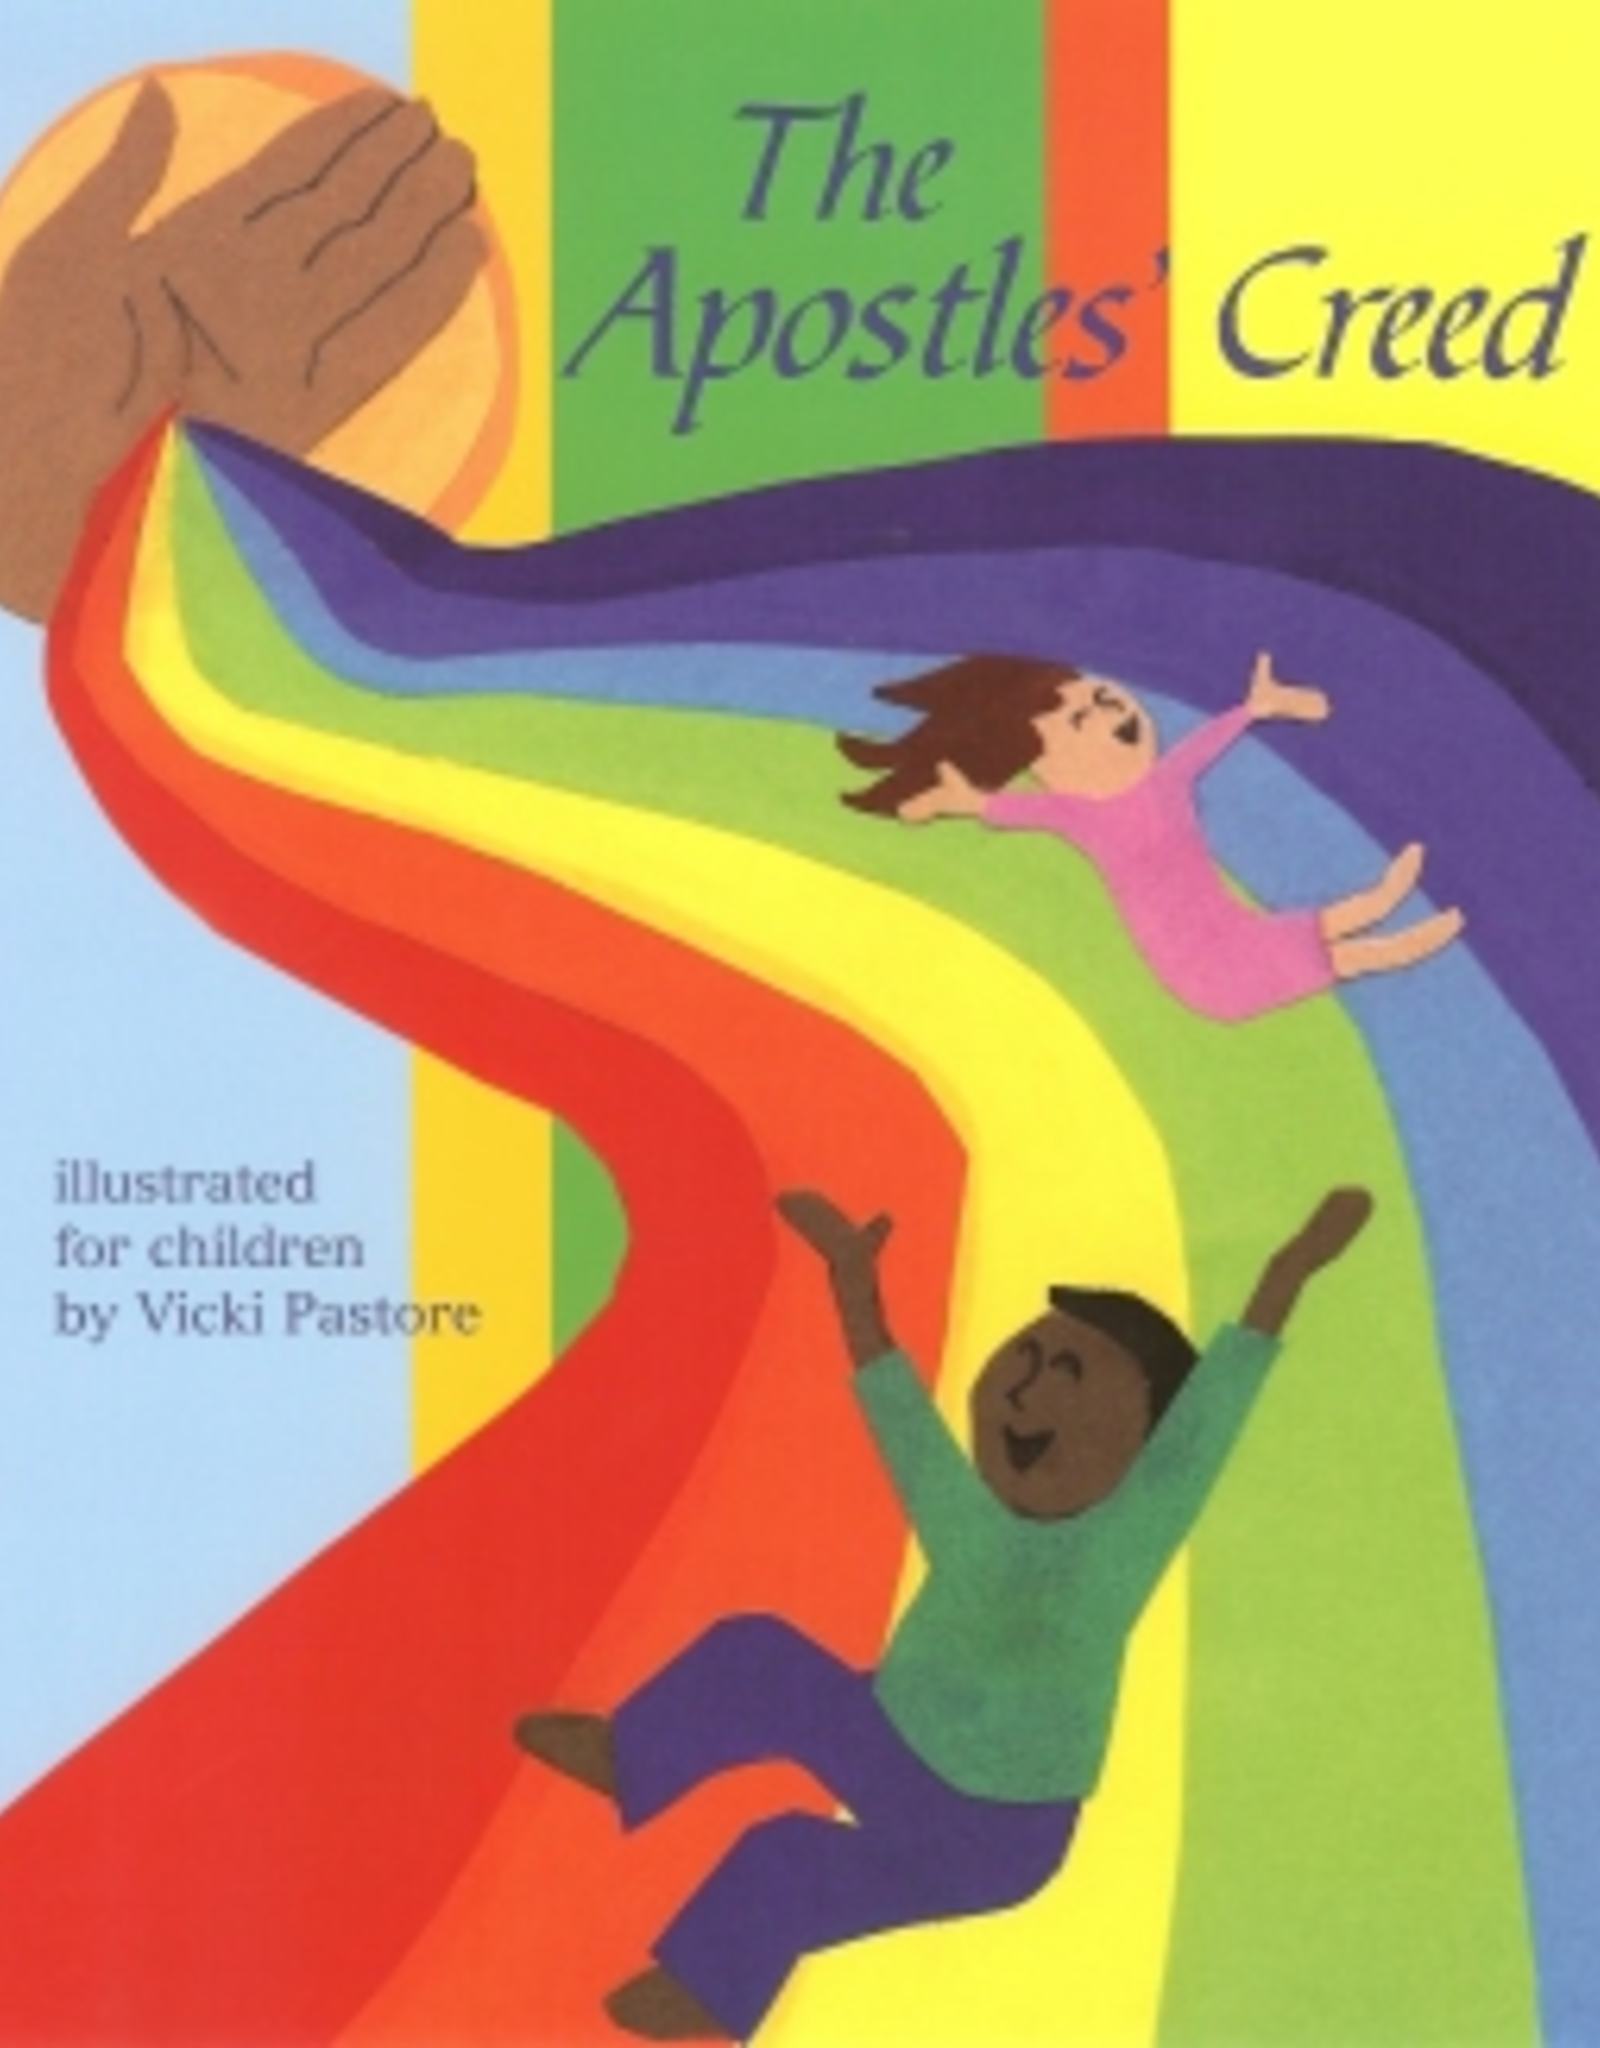 Paulist Press The Apostle's Creed, by Vicki Pastore (paperback)